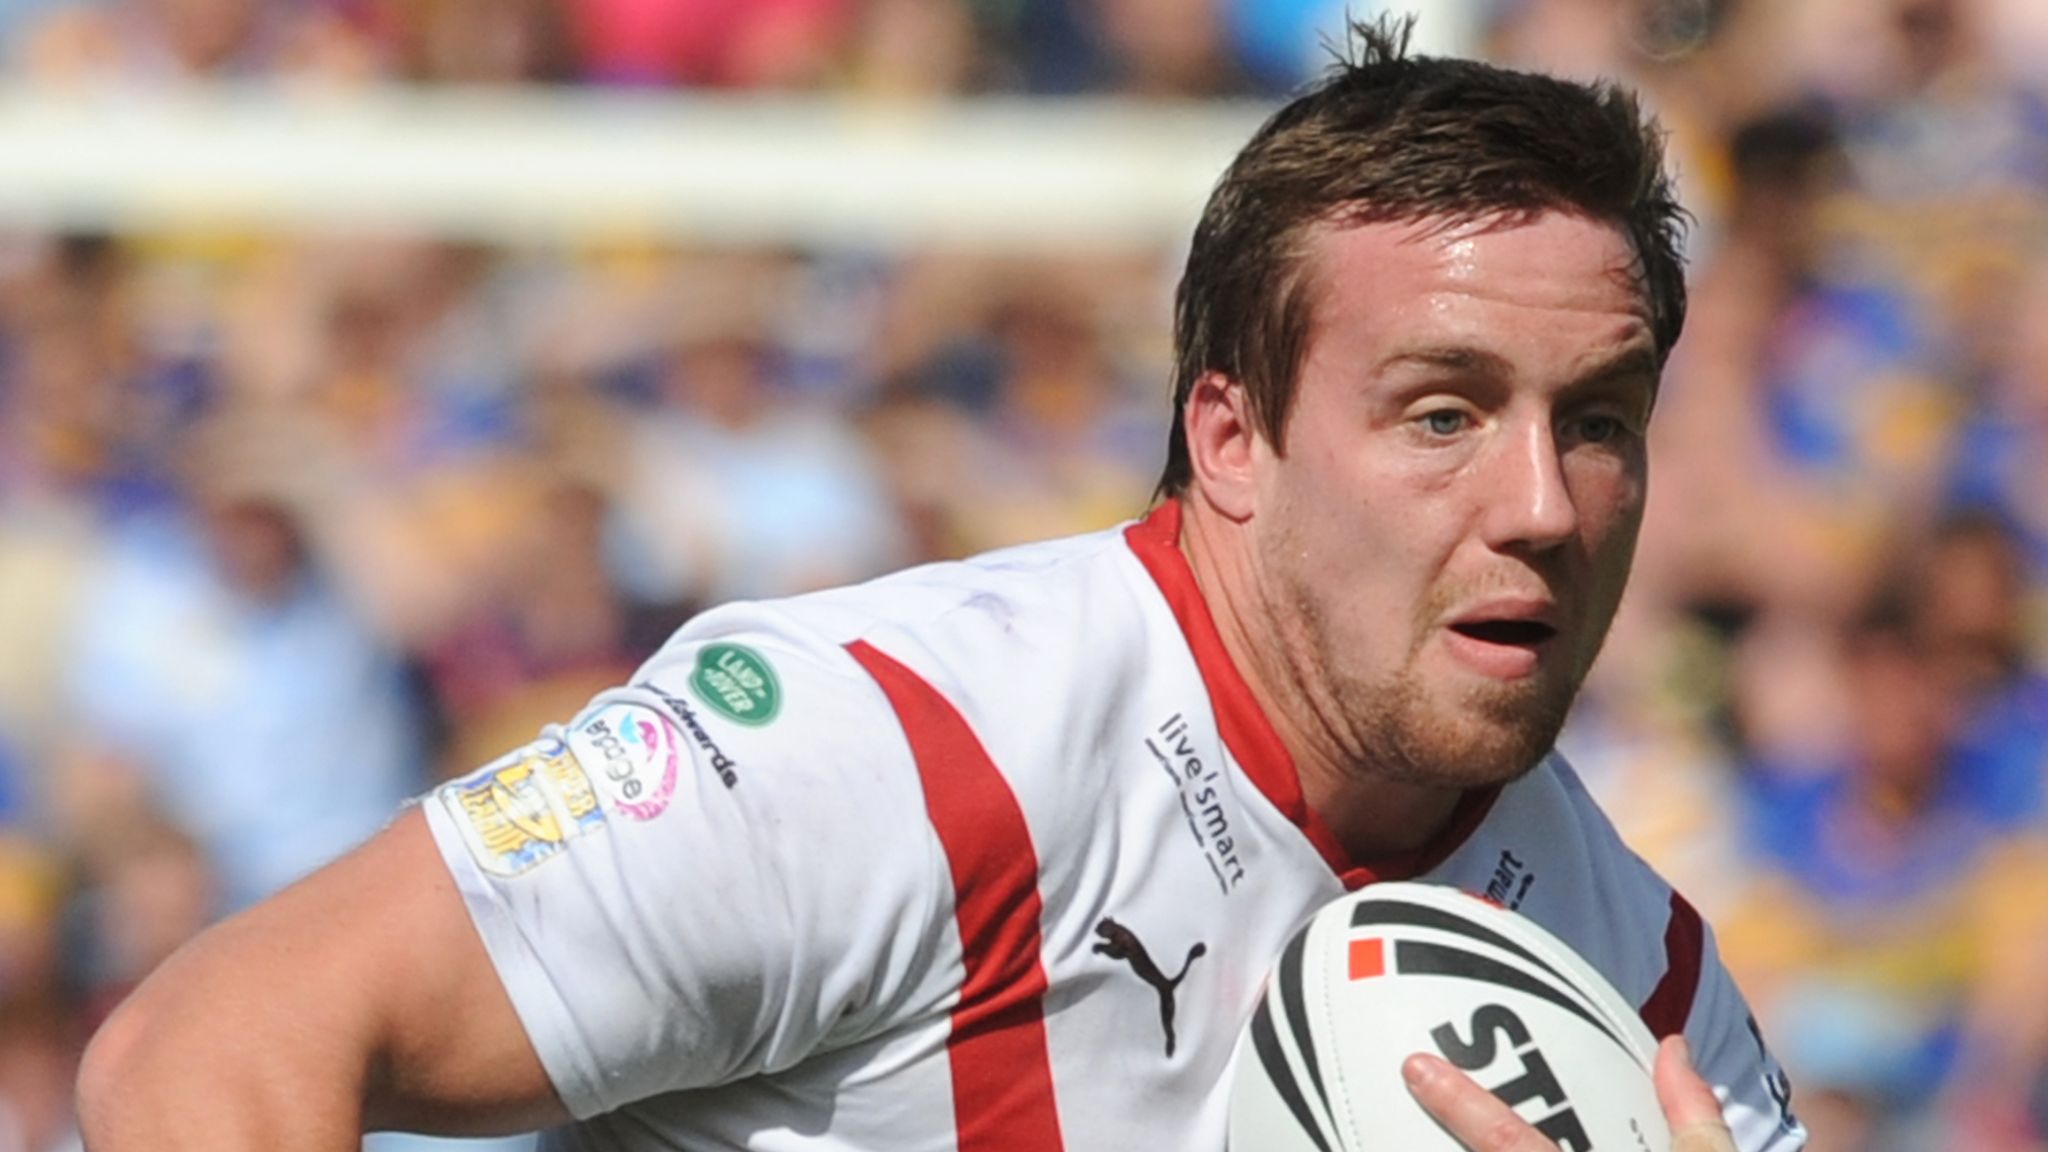 Bryn Hargreaves Former Wigan, St Helens and Bradford player confirmed dead after being missing for more than a year in US Rugby League News Sky Sports